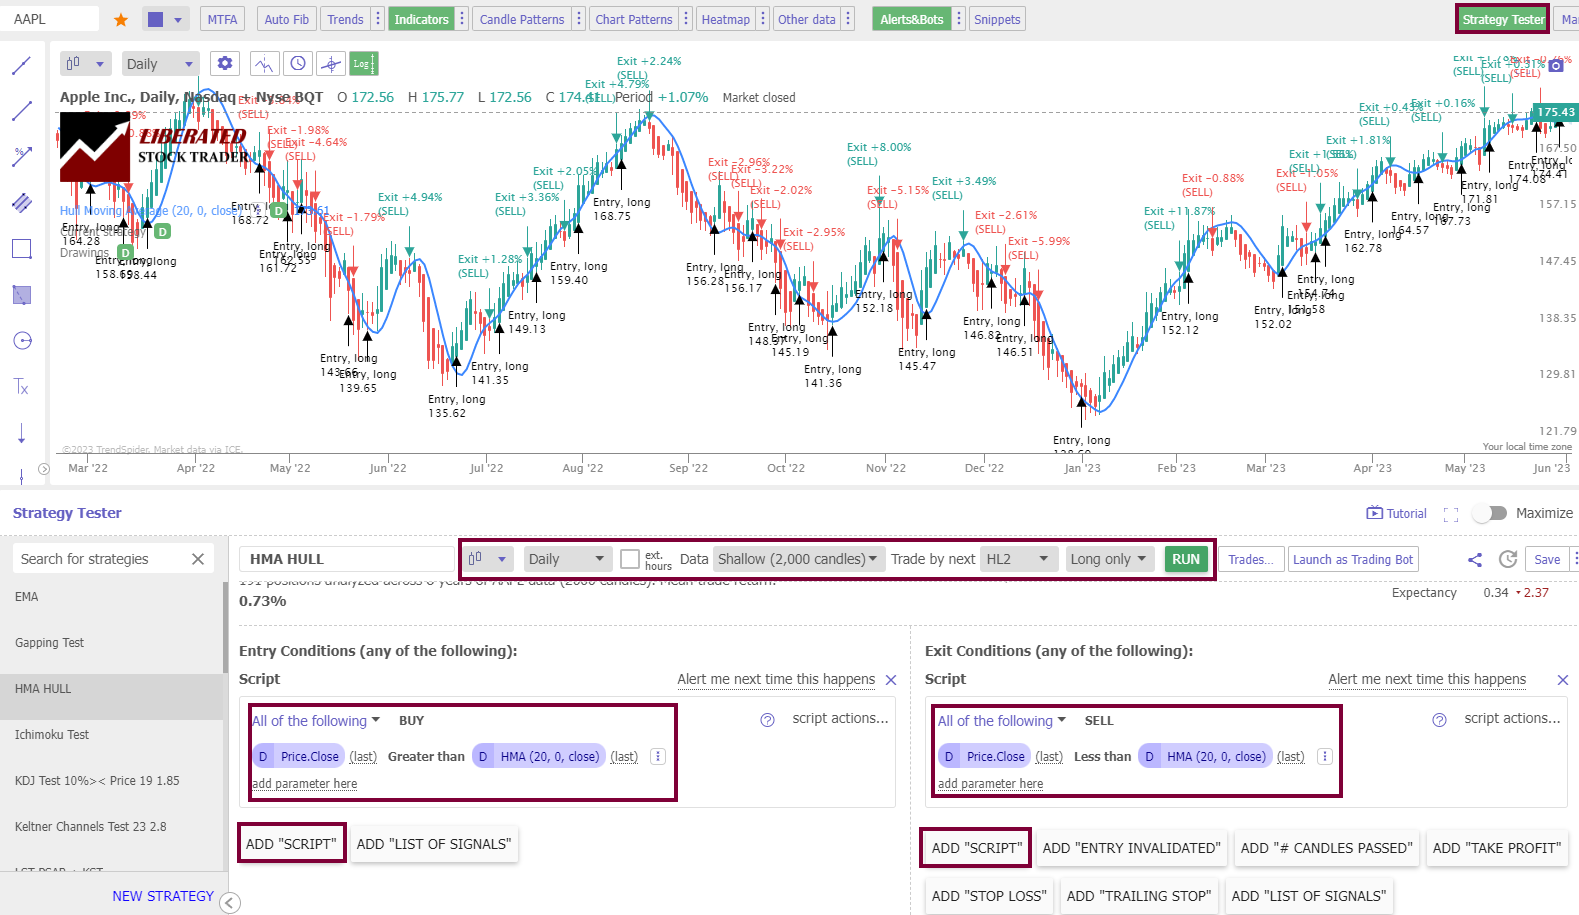 Configuring a Hull Moving Average Backtest Using TrendSpider